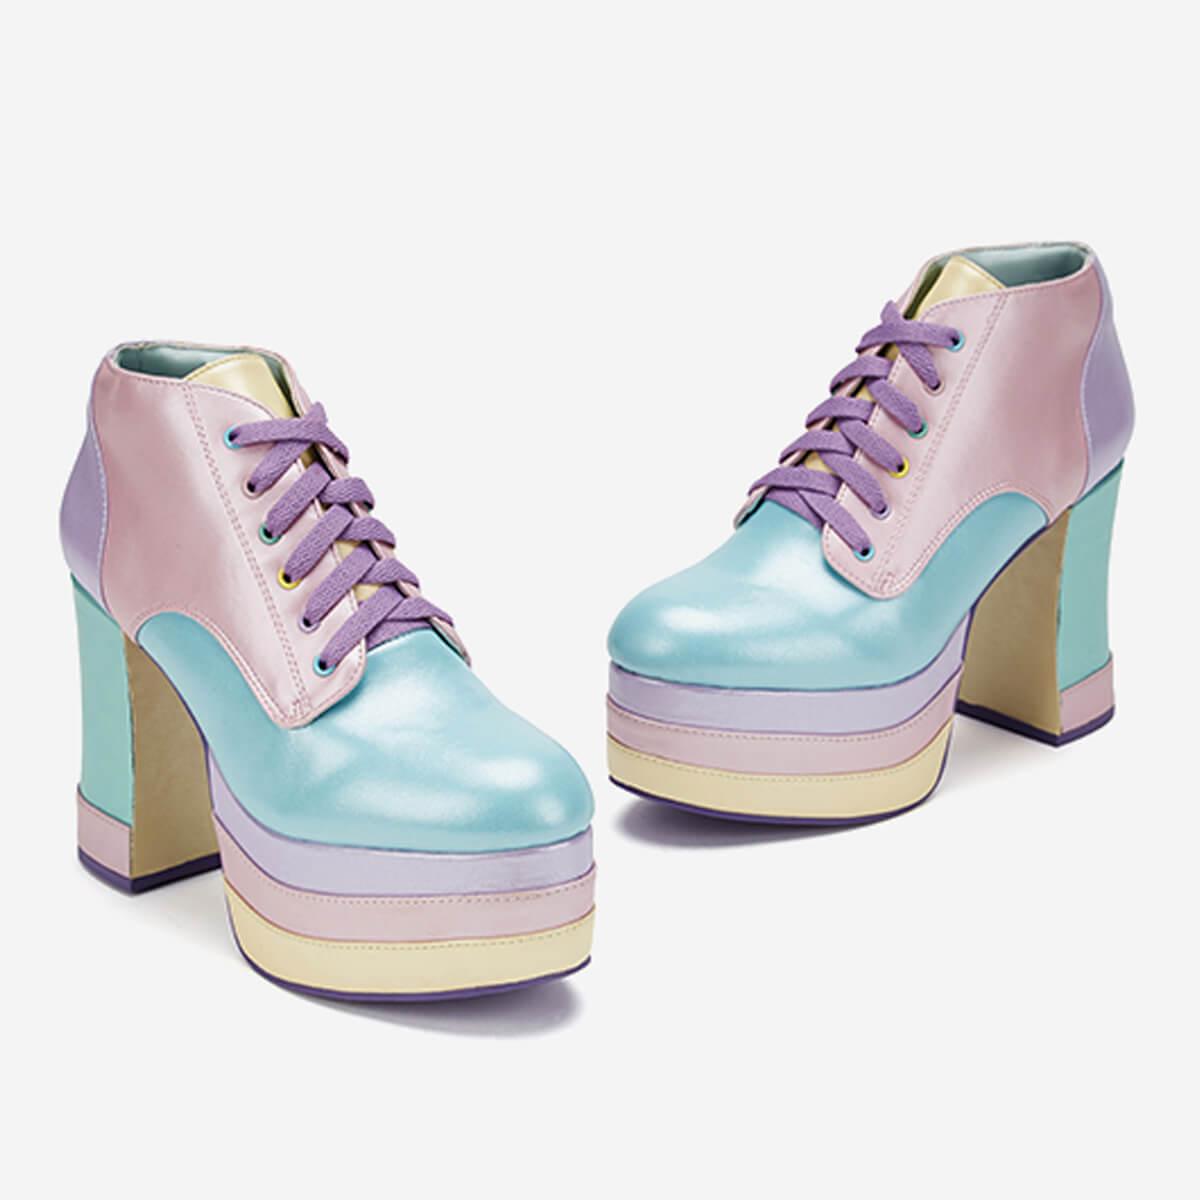 Pastel Cute Aesthetic High Heels Shoes - Aesthetic Clothes Shop